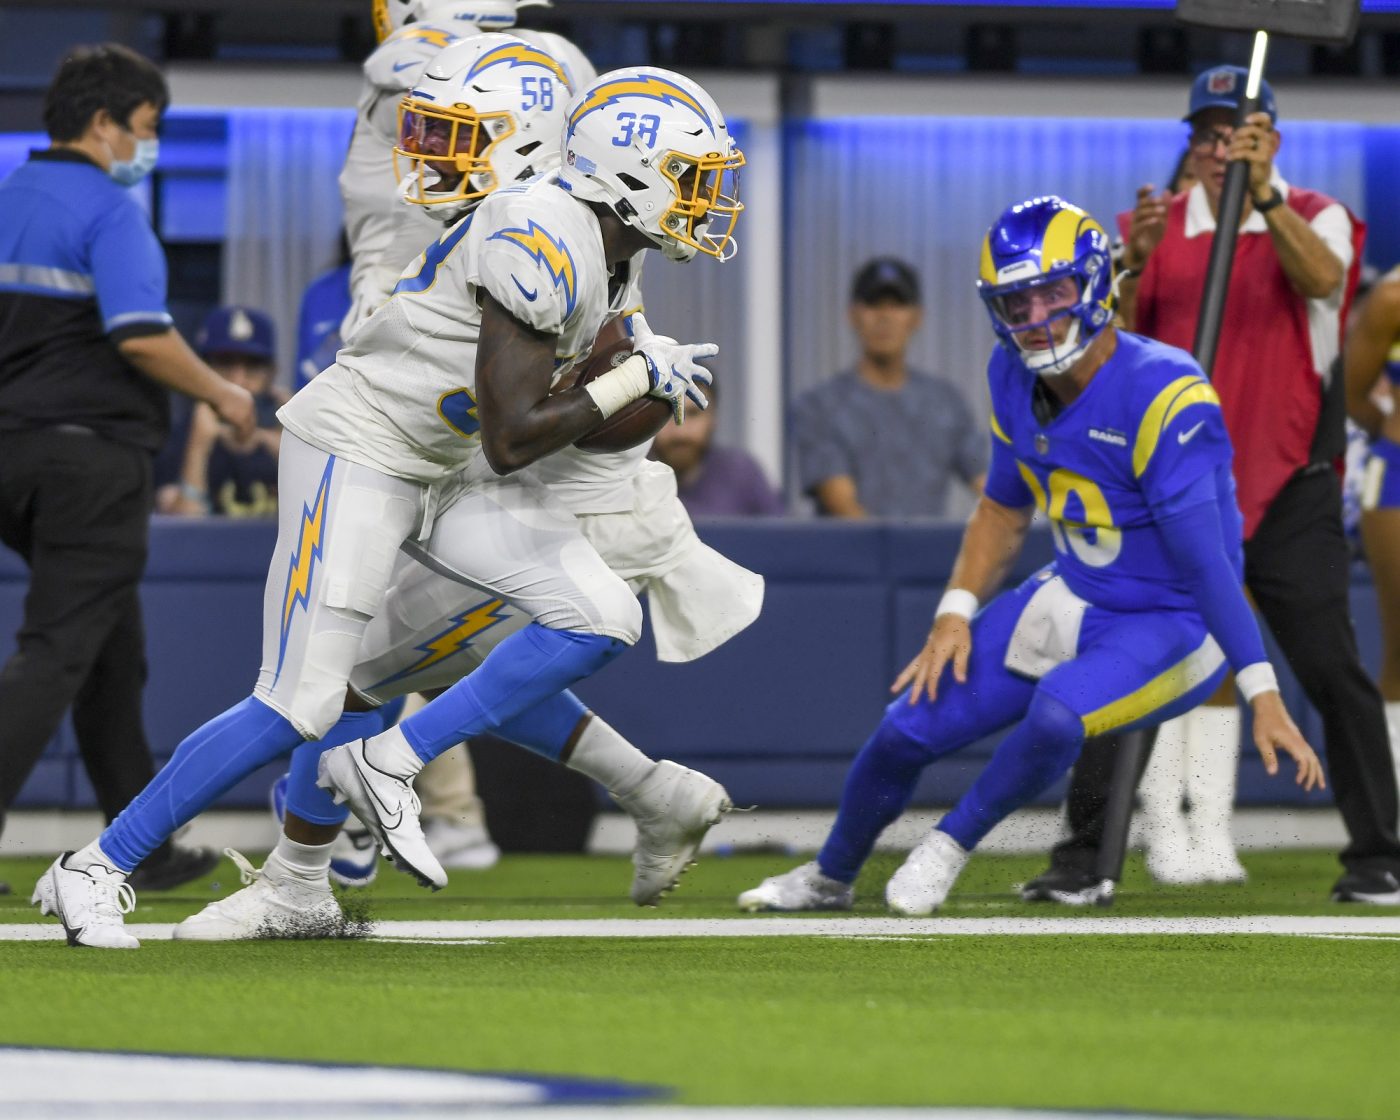 Chargers edge Rams 13-6 in SoFi's first game with fans